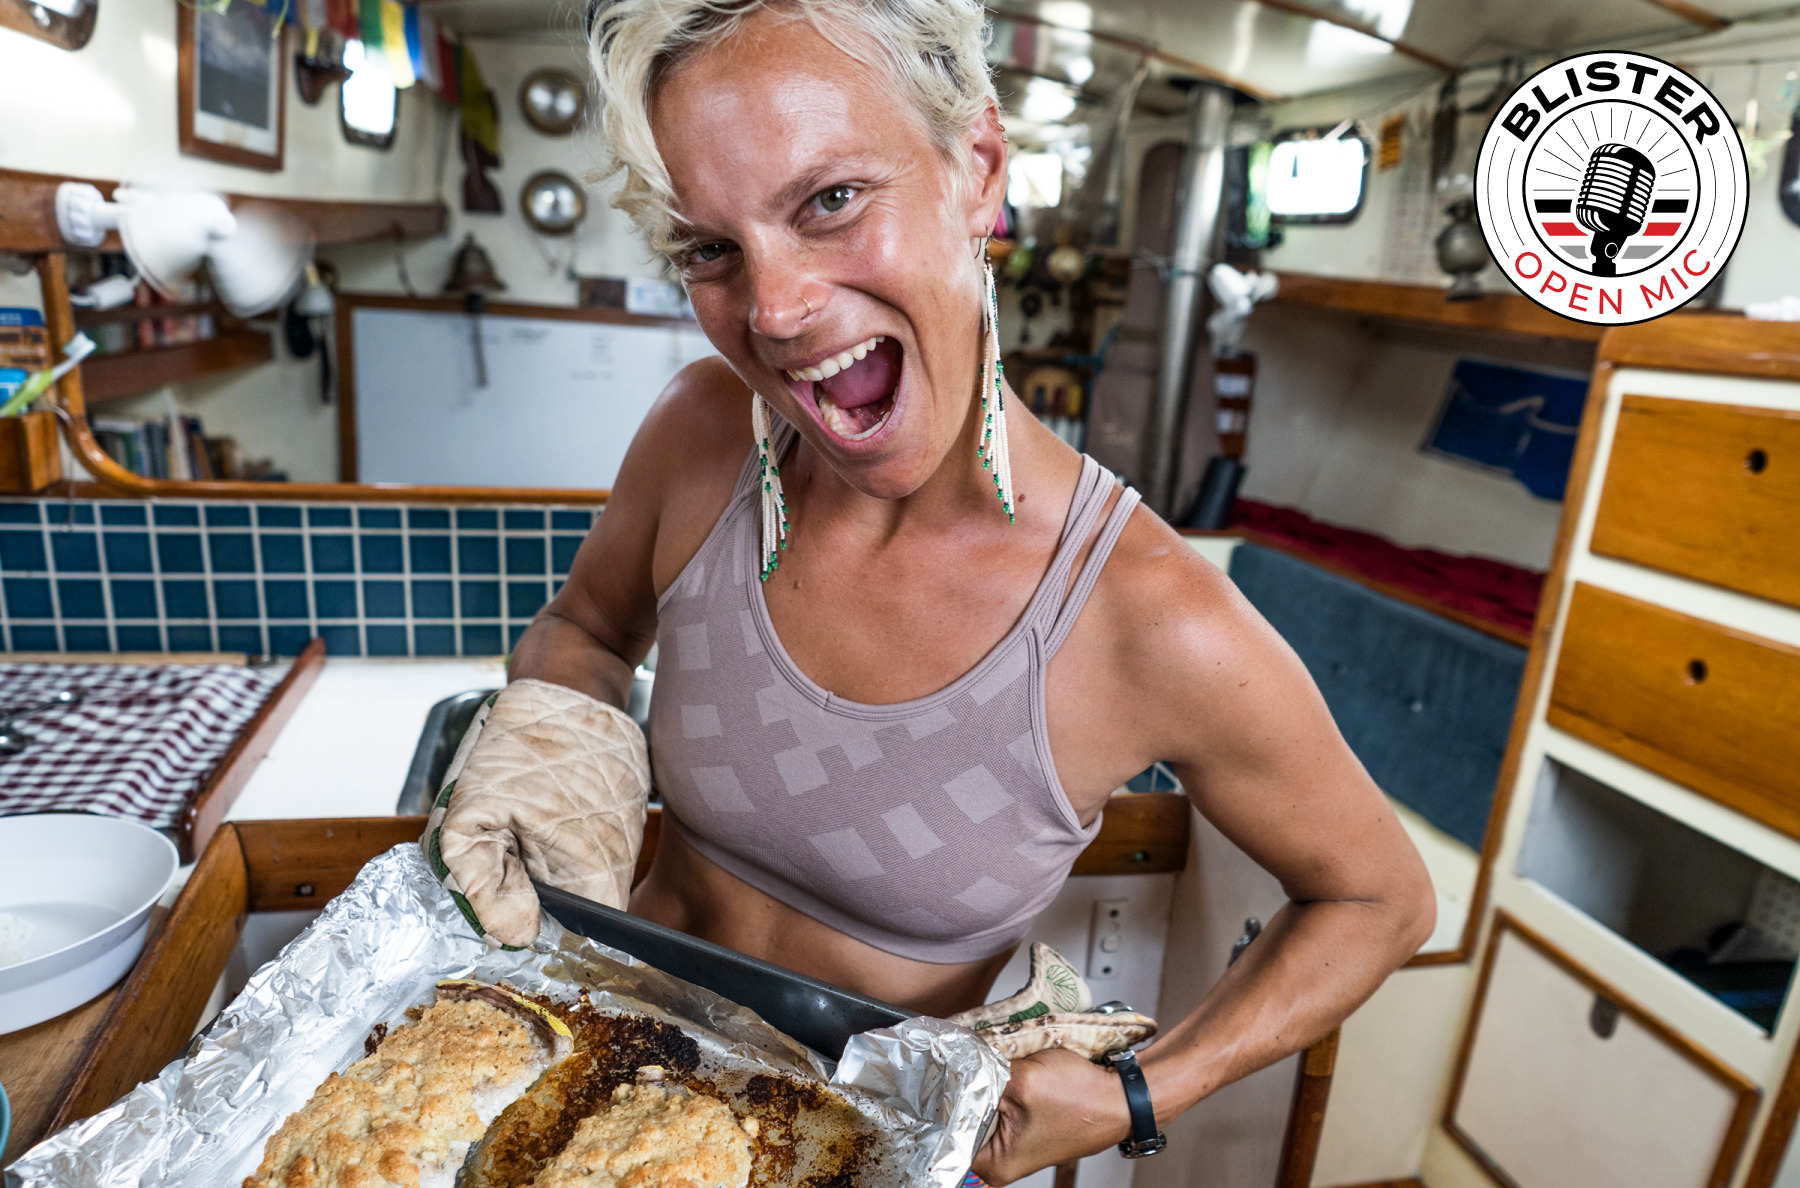 For BLISTER's Open Mic series, Angel Collinson talks about the merits of cooking — greasy, messy, sweaty, cooking, while out at sea.